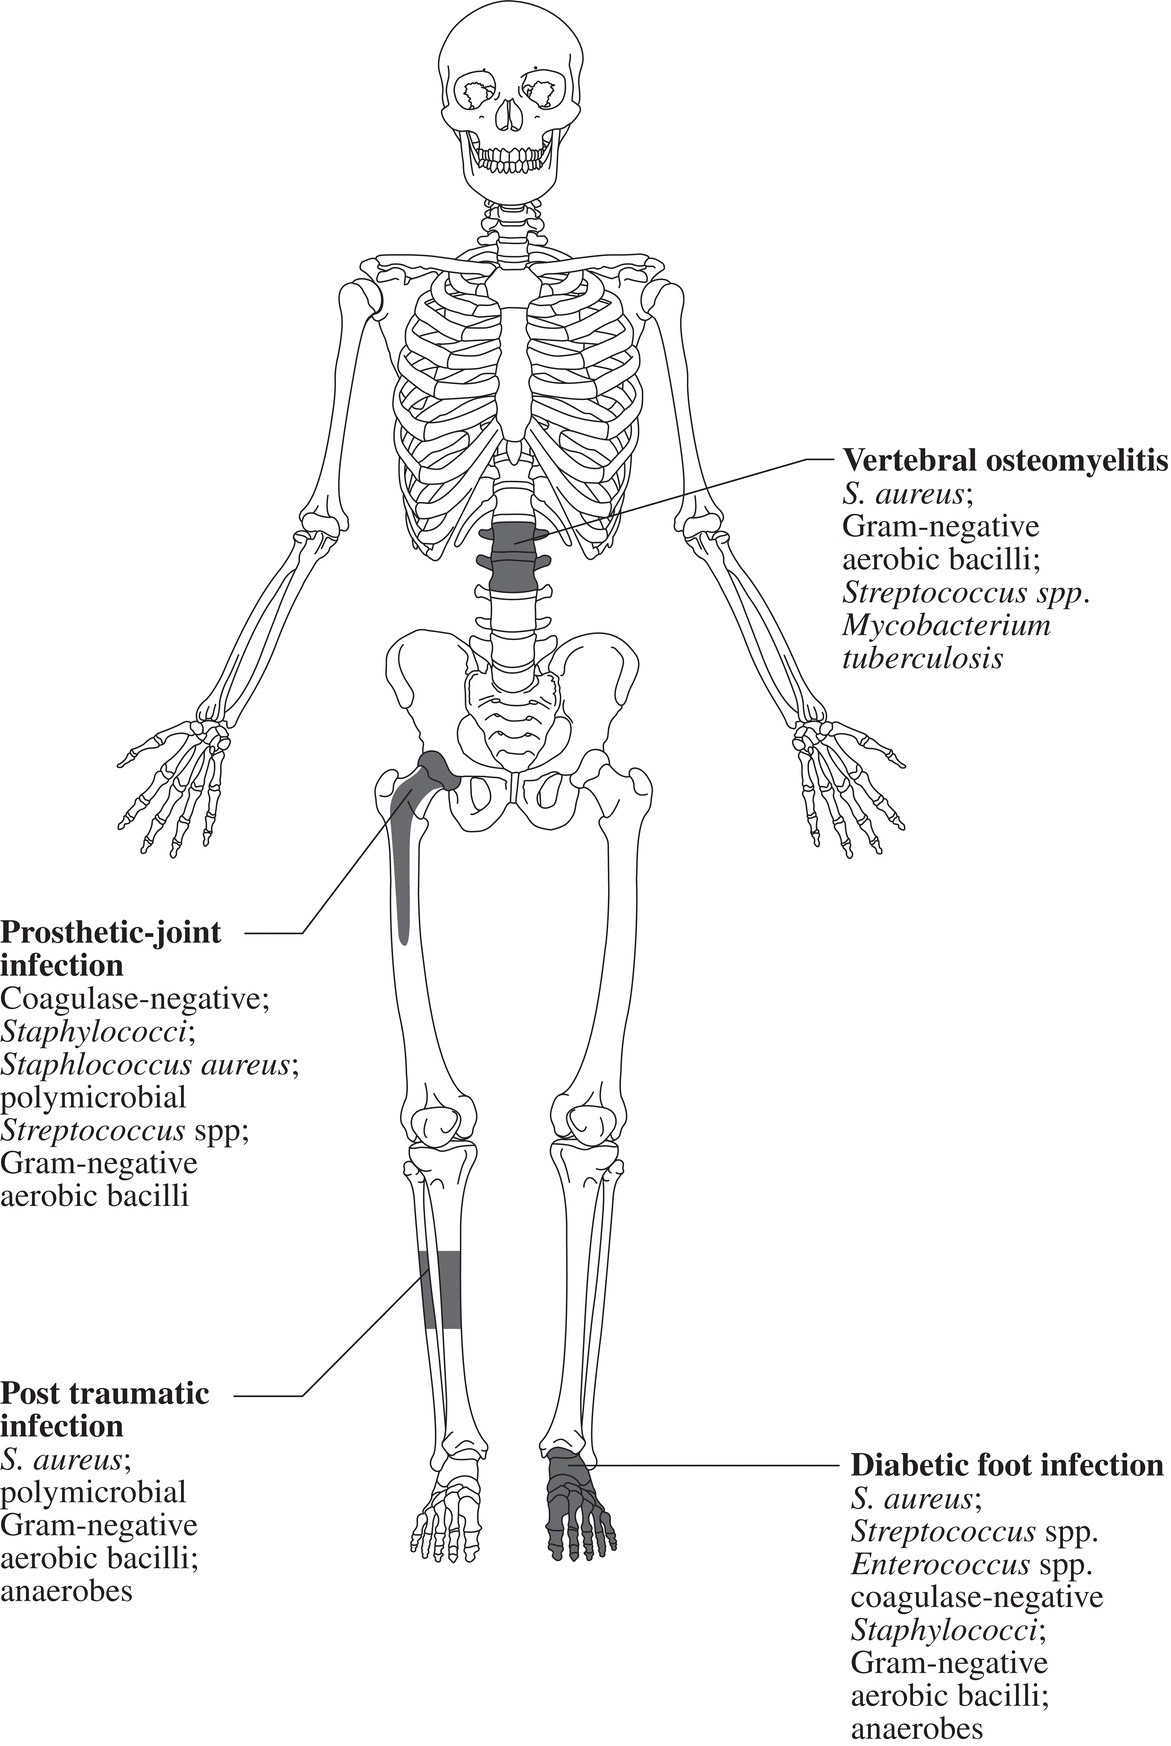 Schematic illustration of the microbiology of osteomyelitis.